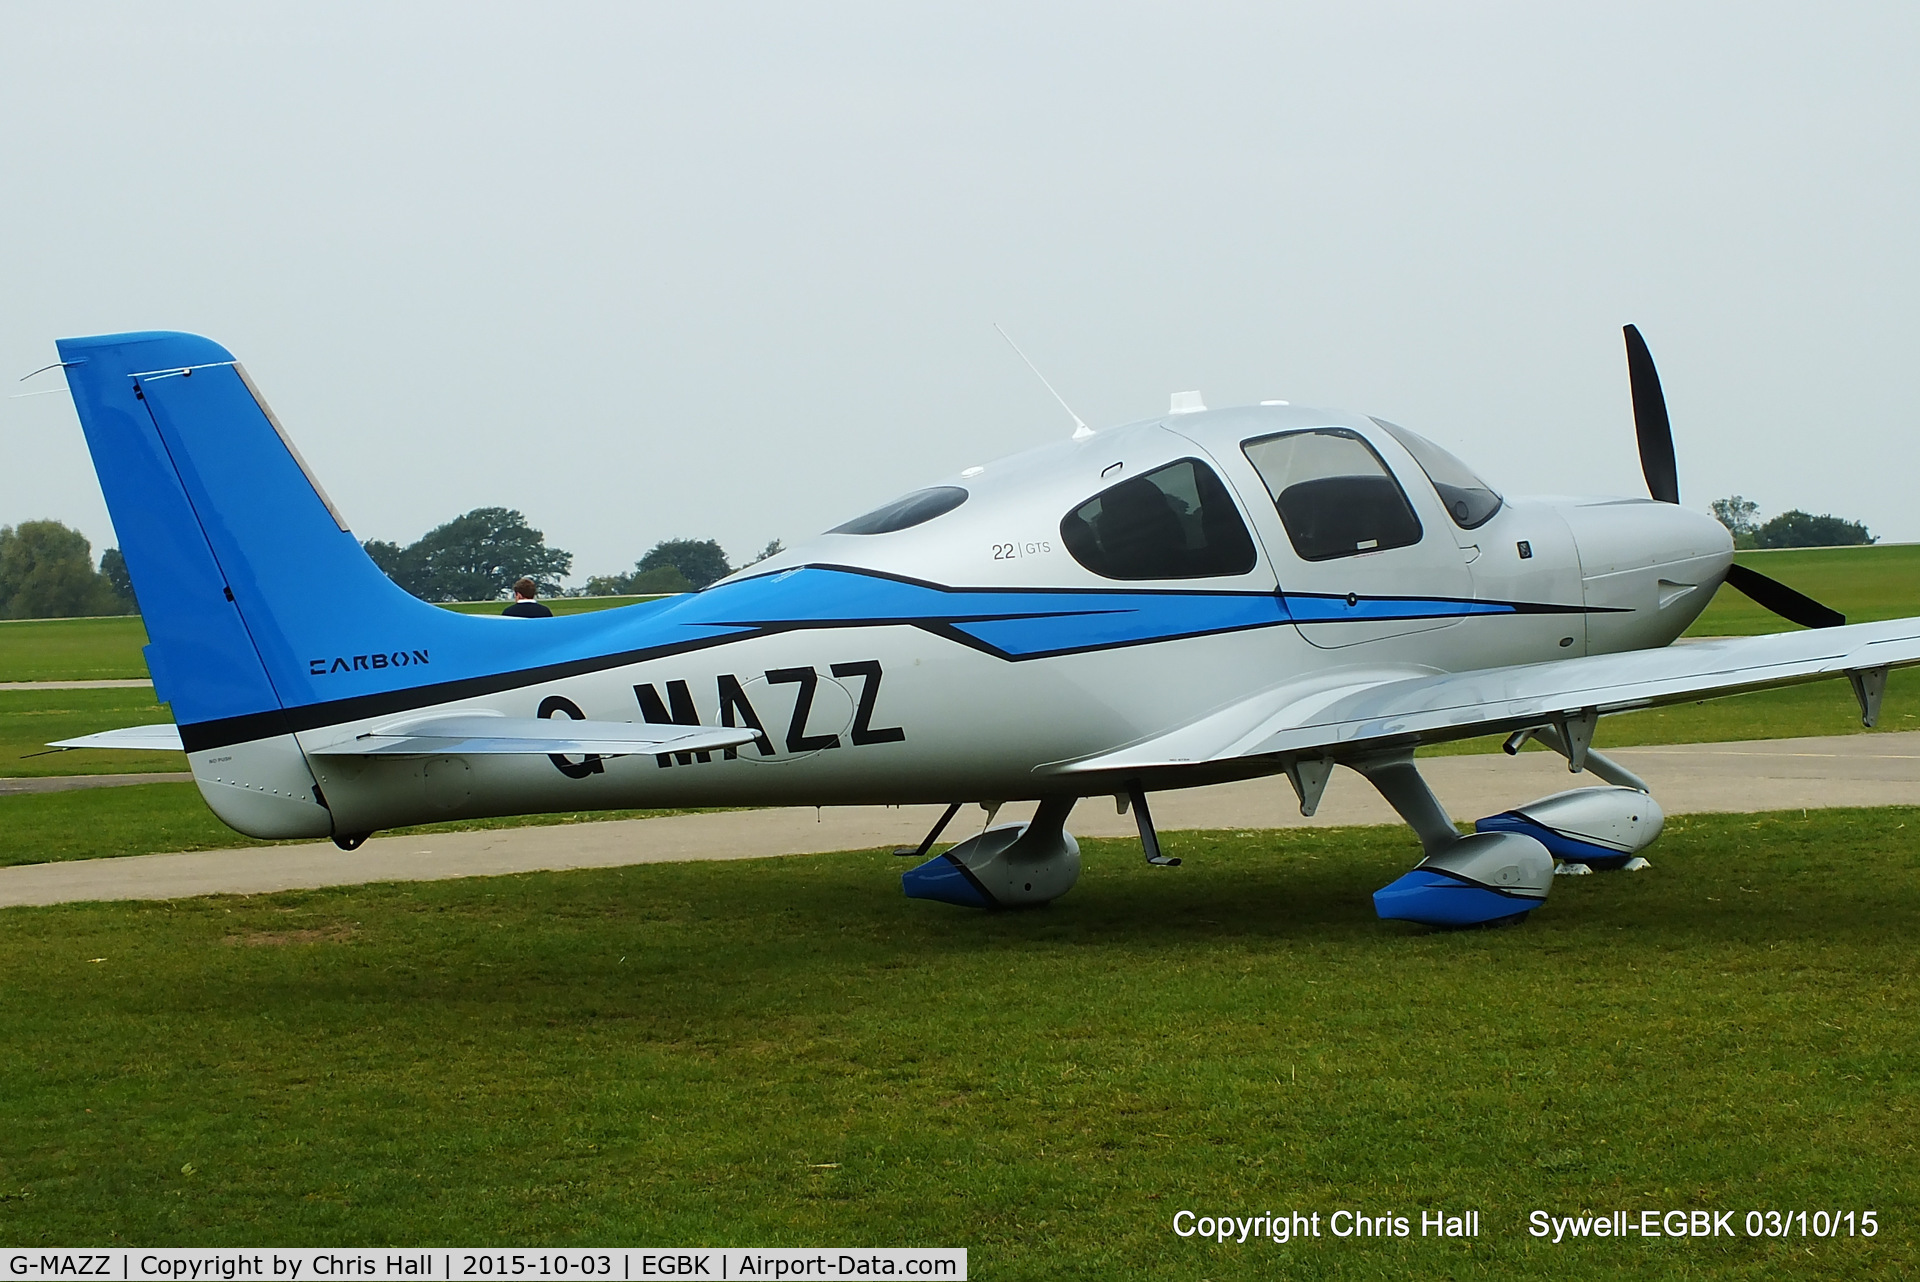 G-MAZZ, 2014 Cirrus SR22 C/N 4135, at The Radial And Training Aircraft Fly-in